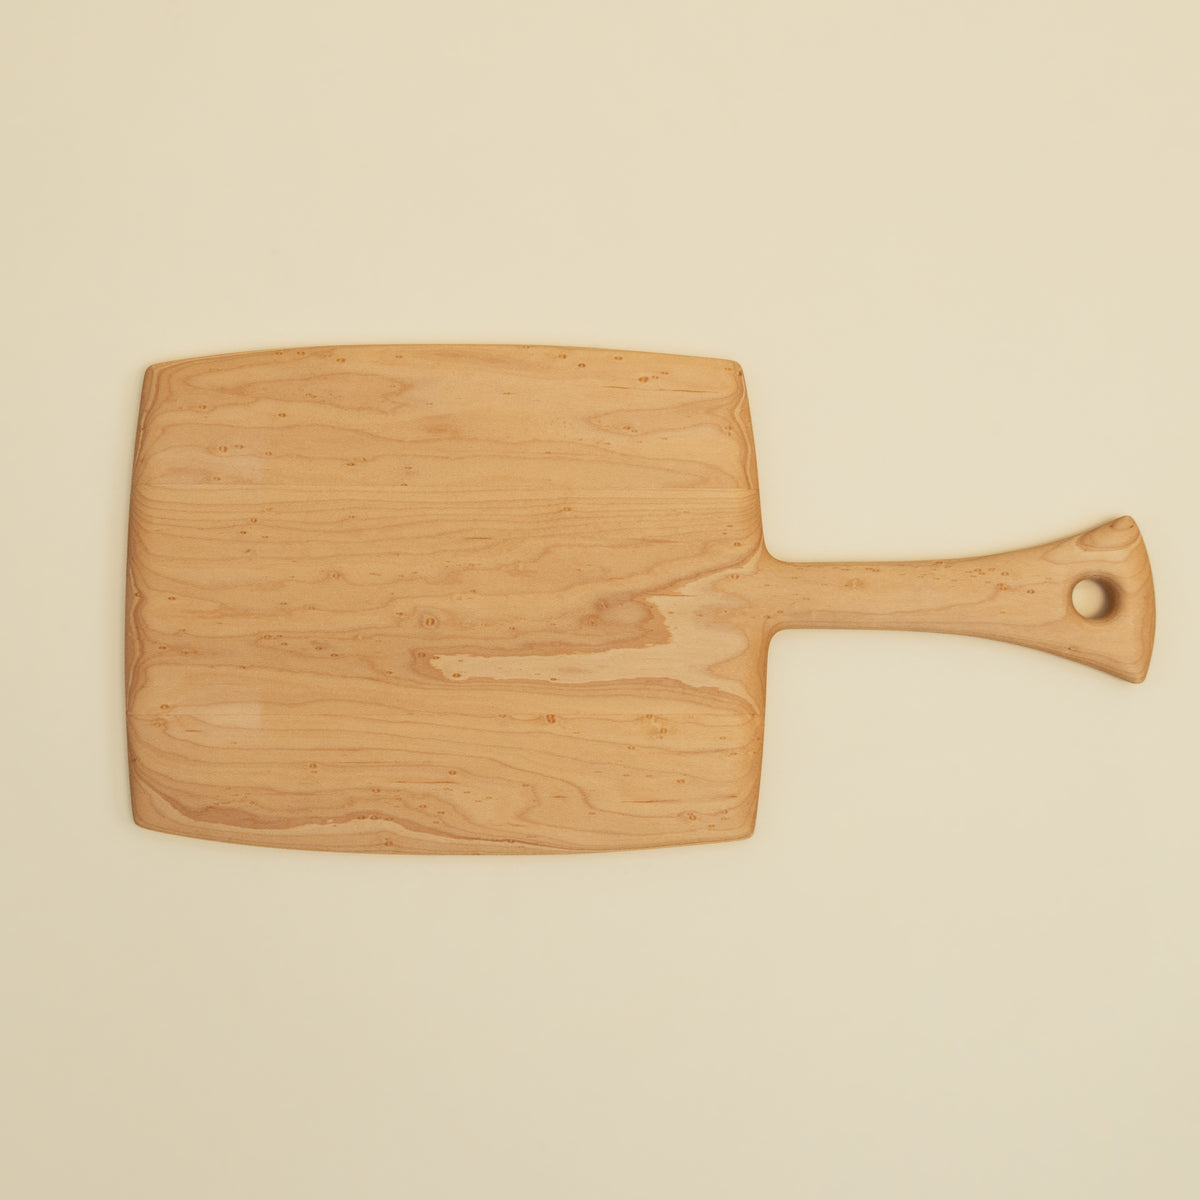 Maple Cutting Board with Handle - 7.75 x 15.5